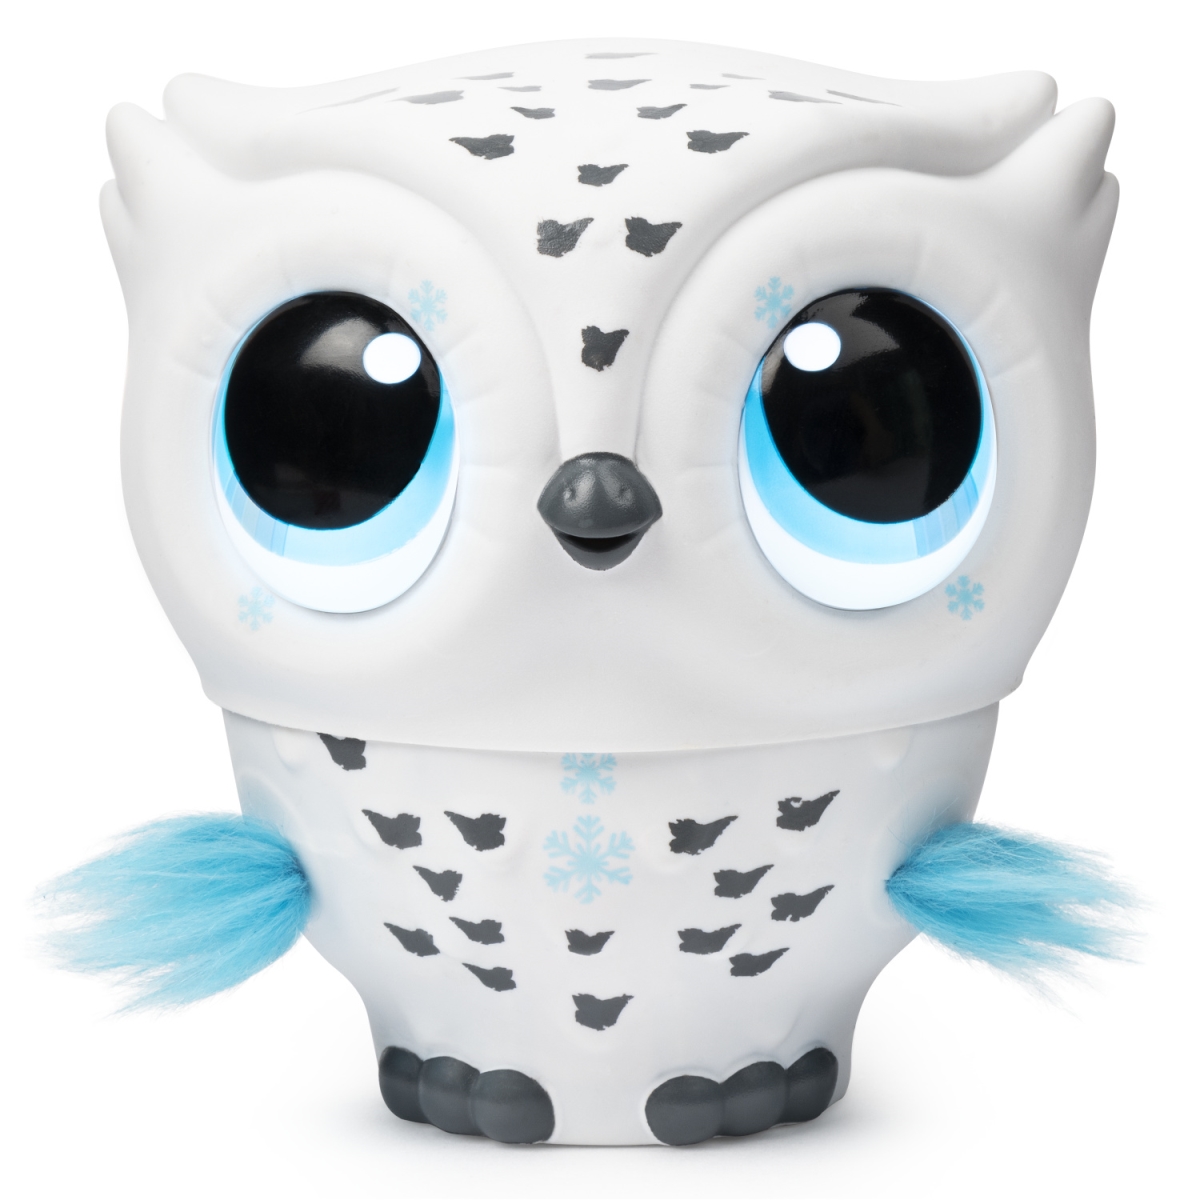 6046156 Owleez Flying Baby Owl Interactive Toy With Lights & Sounds - White